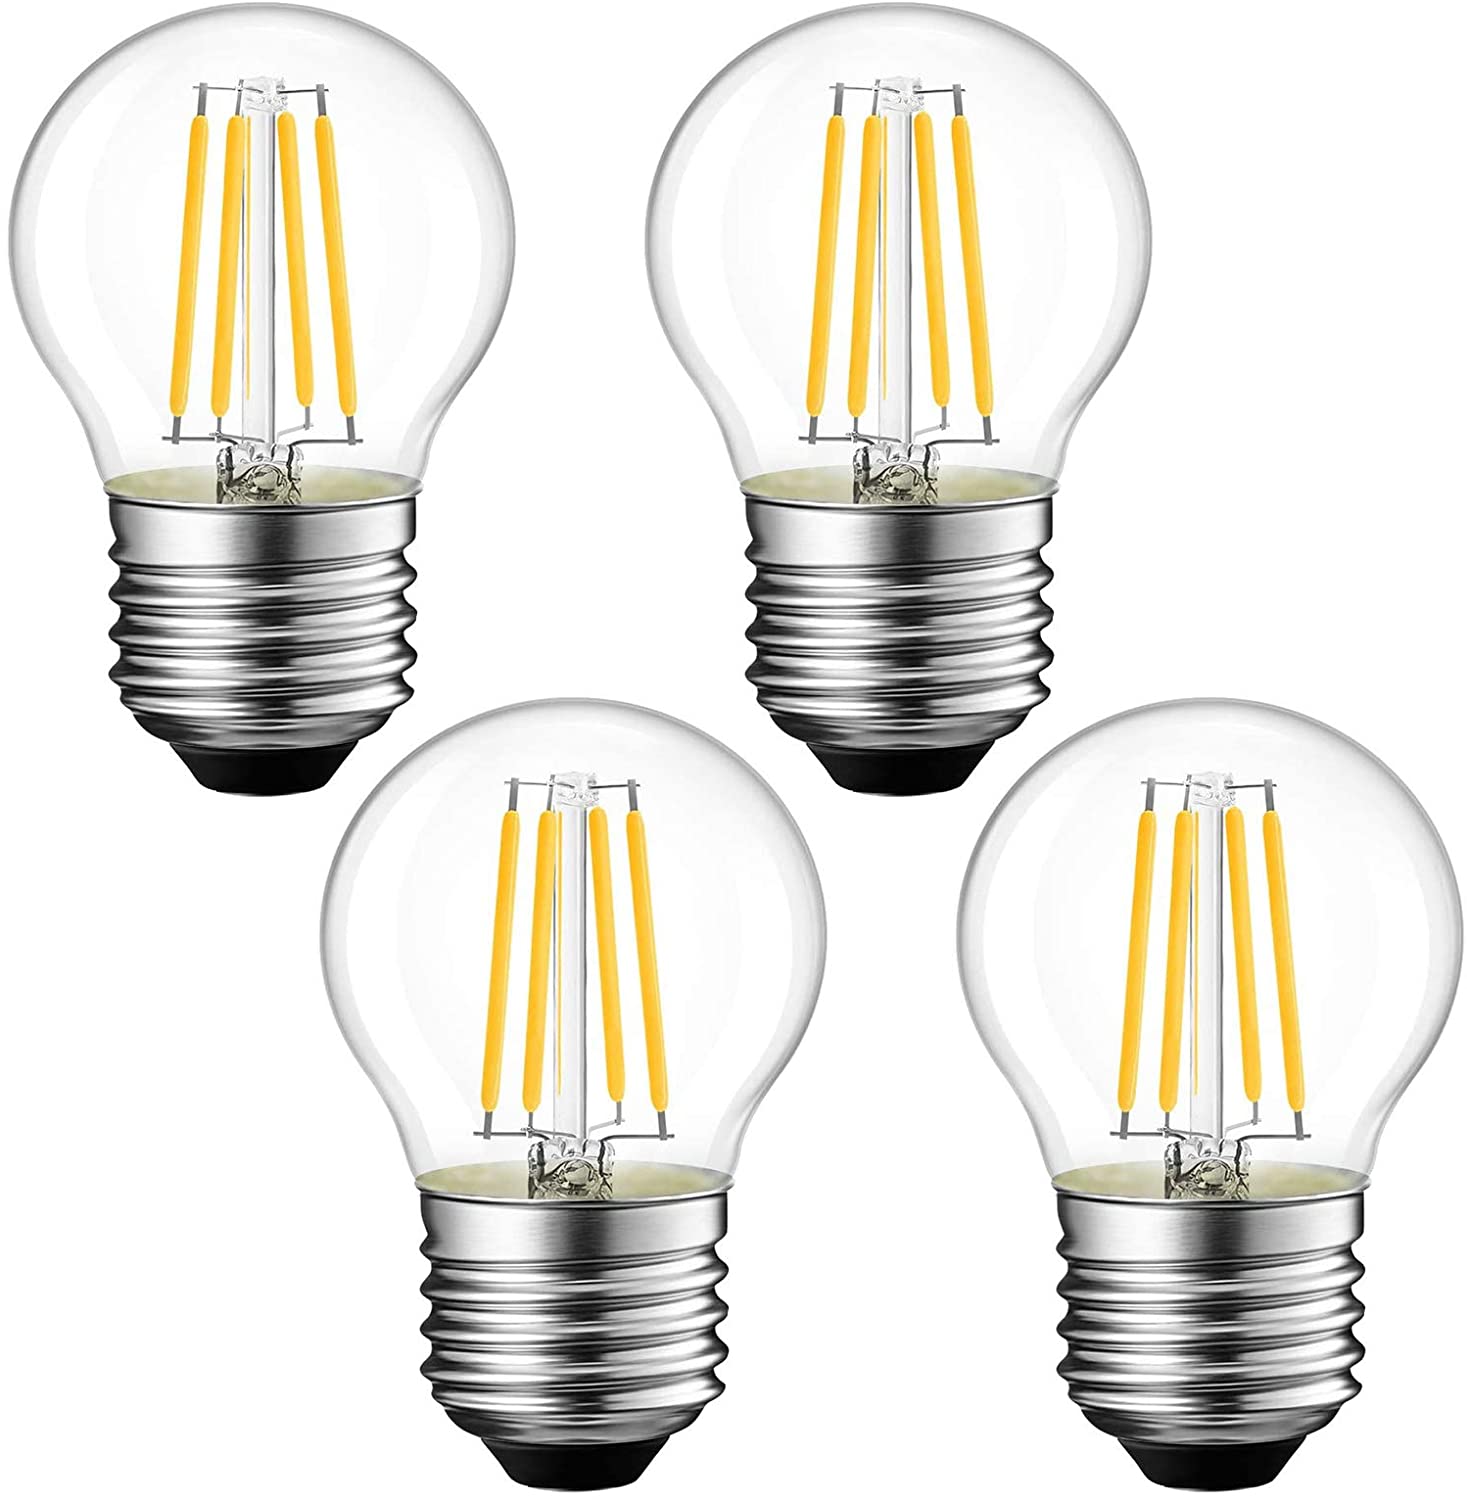 China Cheap price Energy Saving Light Bulbs - G45 LED Industrial Vintage Edison Style LED Filament Light Bulb Dimmable Soft Warm – Firstech